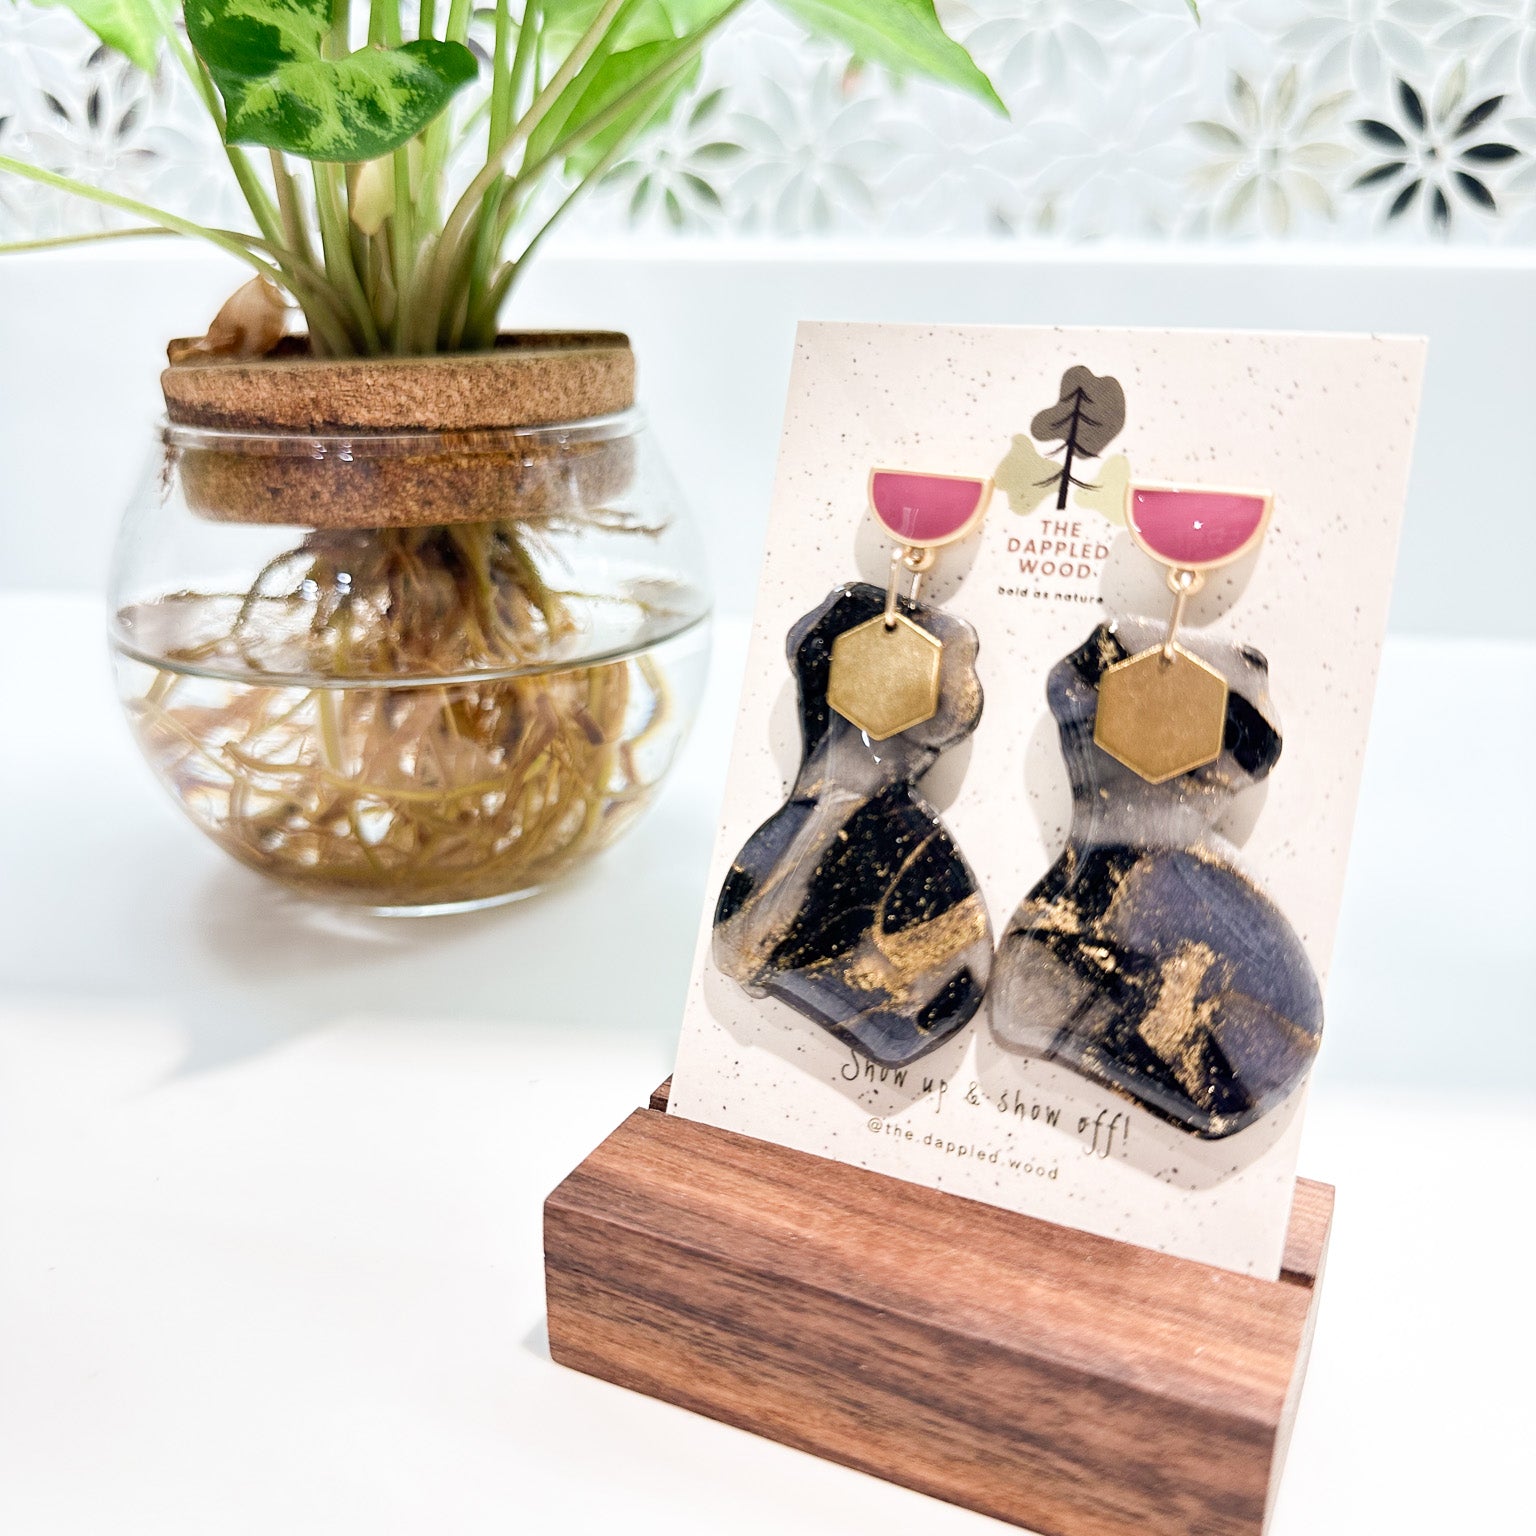 A pair of polymer clay earrings displayed on a speckled card with The Dappled Wood logo. The earrings feature a marbled black and gray pattern with shimmering gold accents and are in the shape of a curvy woman that is adorned with a brass hexagon charm. The earrings hang from pink and gold half moon posts. They are flanked by a green plant in a clear vase where roots are shown growing in water with a floral tile mosaic in the background. 